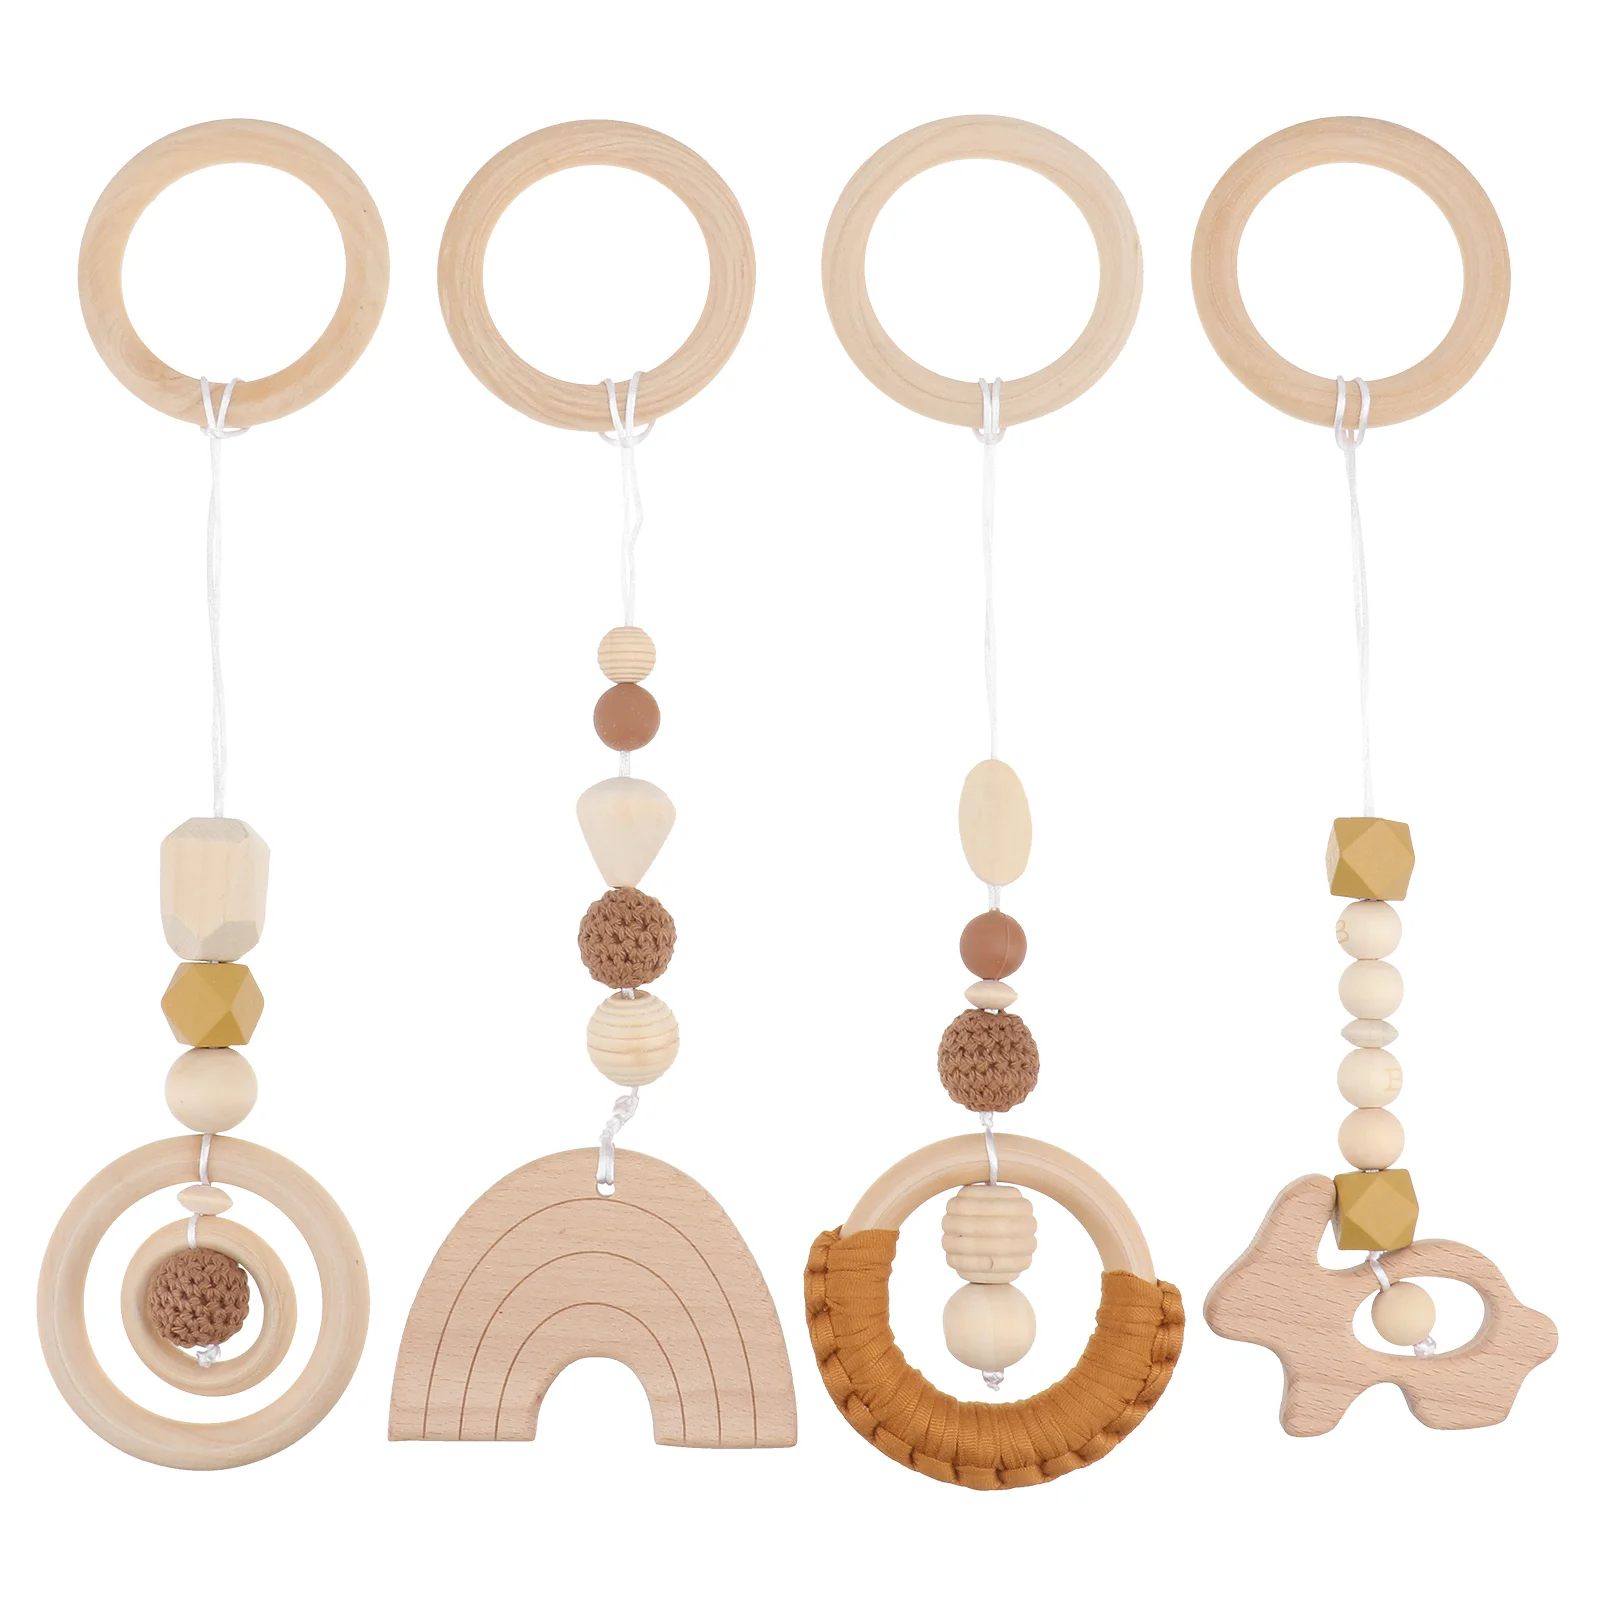 

Baby Gym Wooden Toys Teether Play Teething Hanging Rings Wood Diygyms Activity Decoration Crib Unique Infant Decor Prop Photo